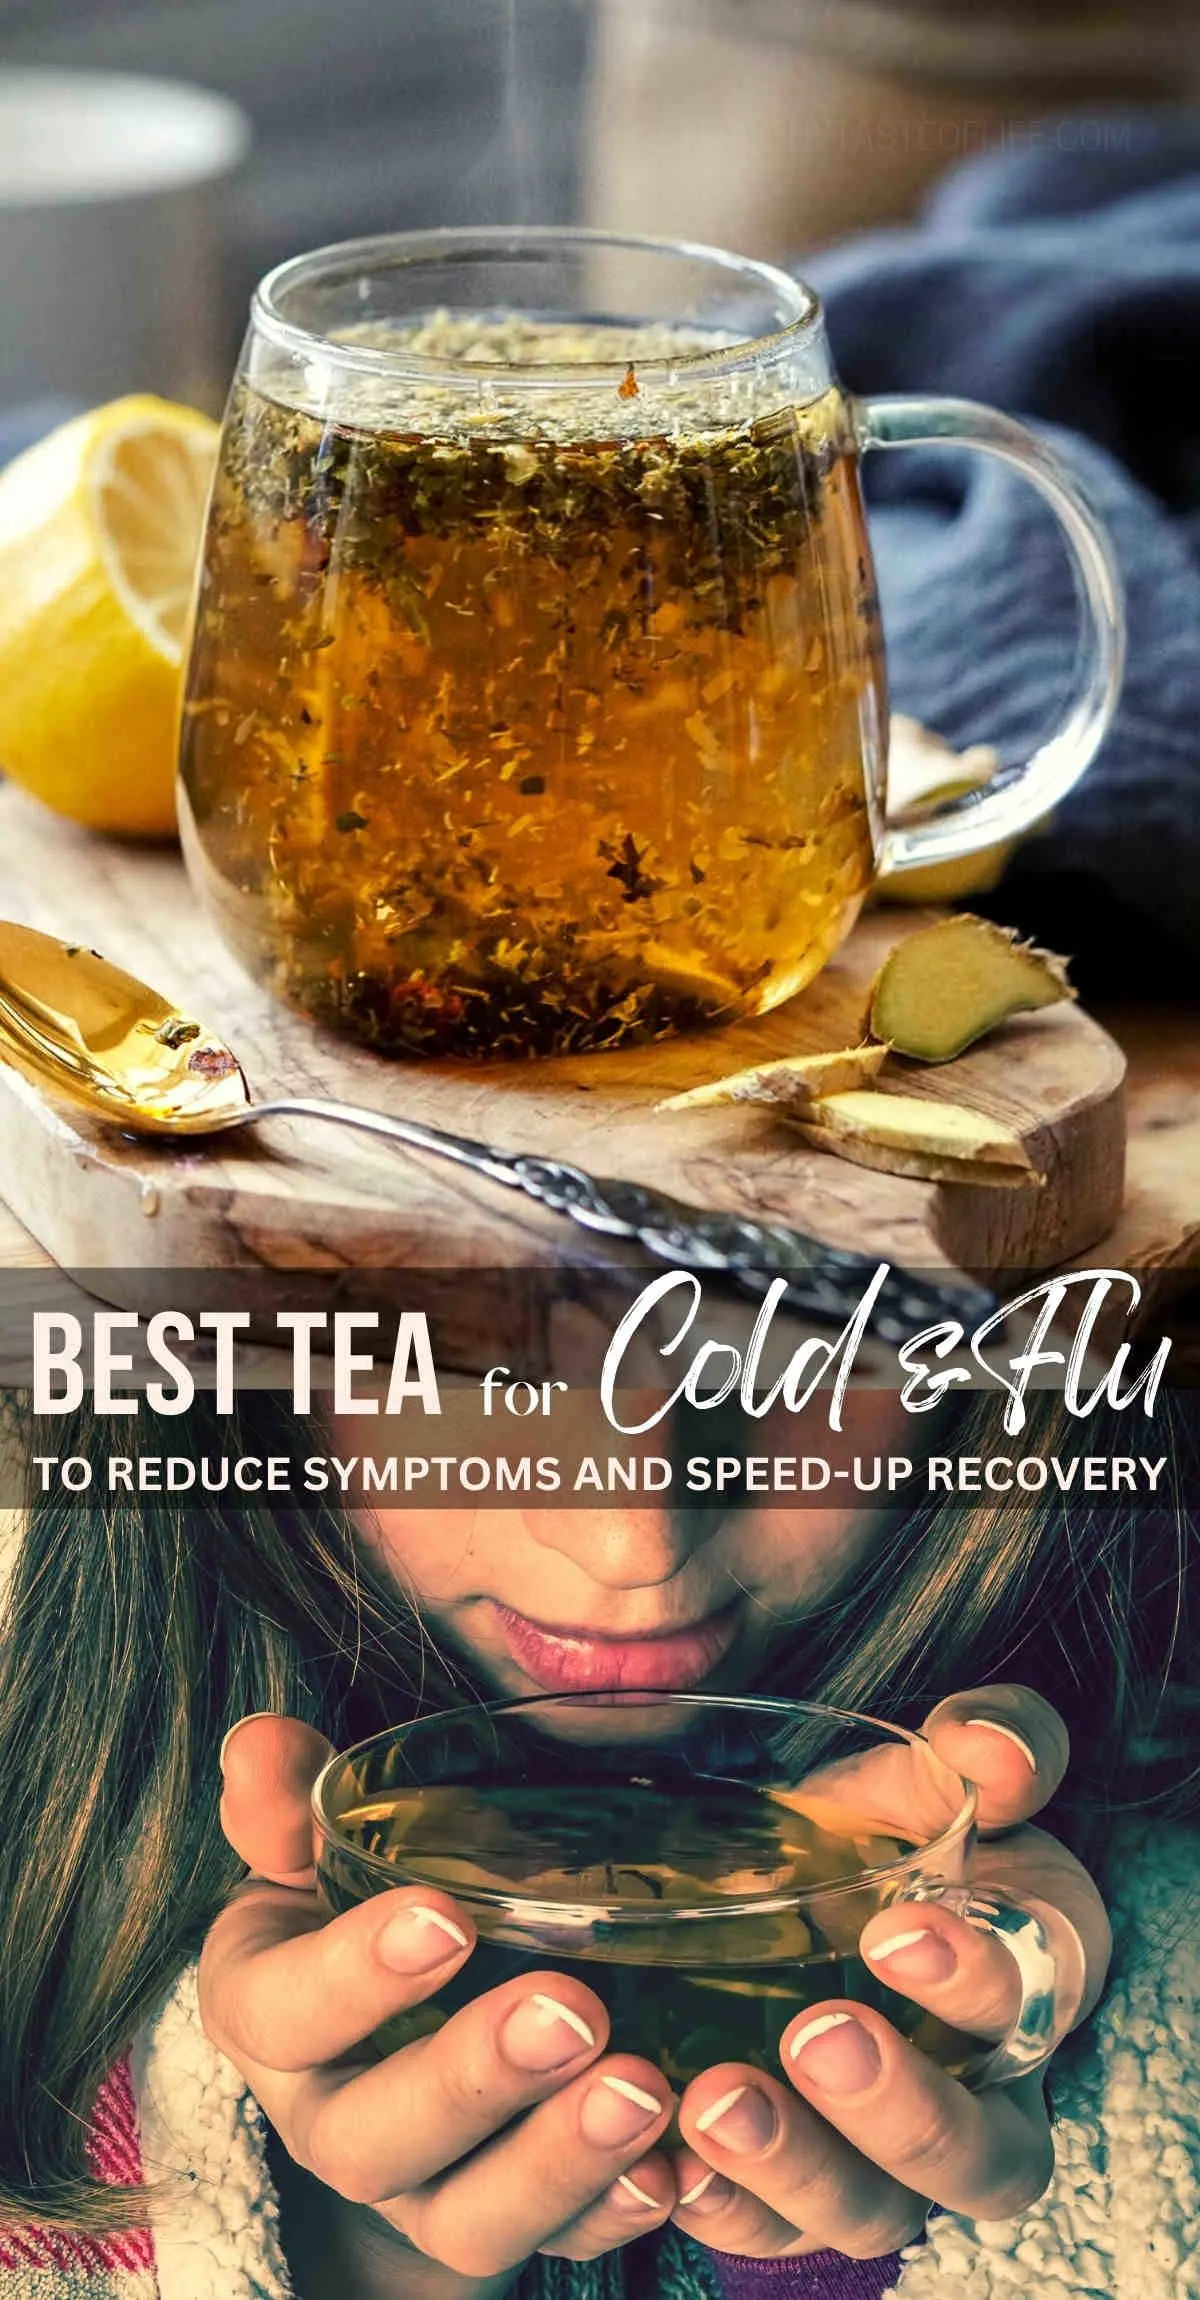 A homemade tea for cold and flu made with a mix of herbs that will help you get through your symptoms easier. This natural remedy for cold / flu, is the best way to hydrate while easing congestion, aches, and cough. The special blend of herbs in this tea recipe is intended to help reduce inflammation, boost immunity, and soothe sore throats. Prepare the best tea for colds and flu in advance by pre-mixing all ingredients in a jar. #teaforcold #herbaltea #cold #flu #coldremedies #best #homemade 